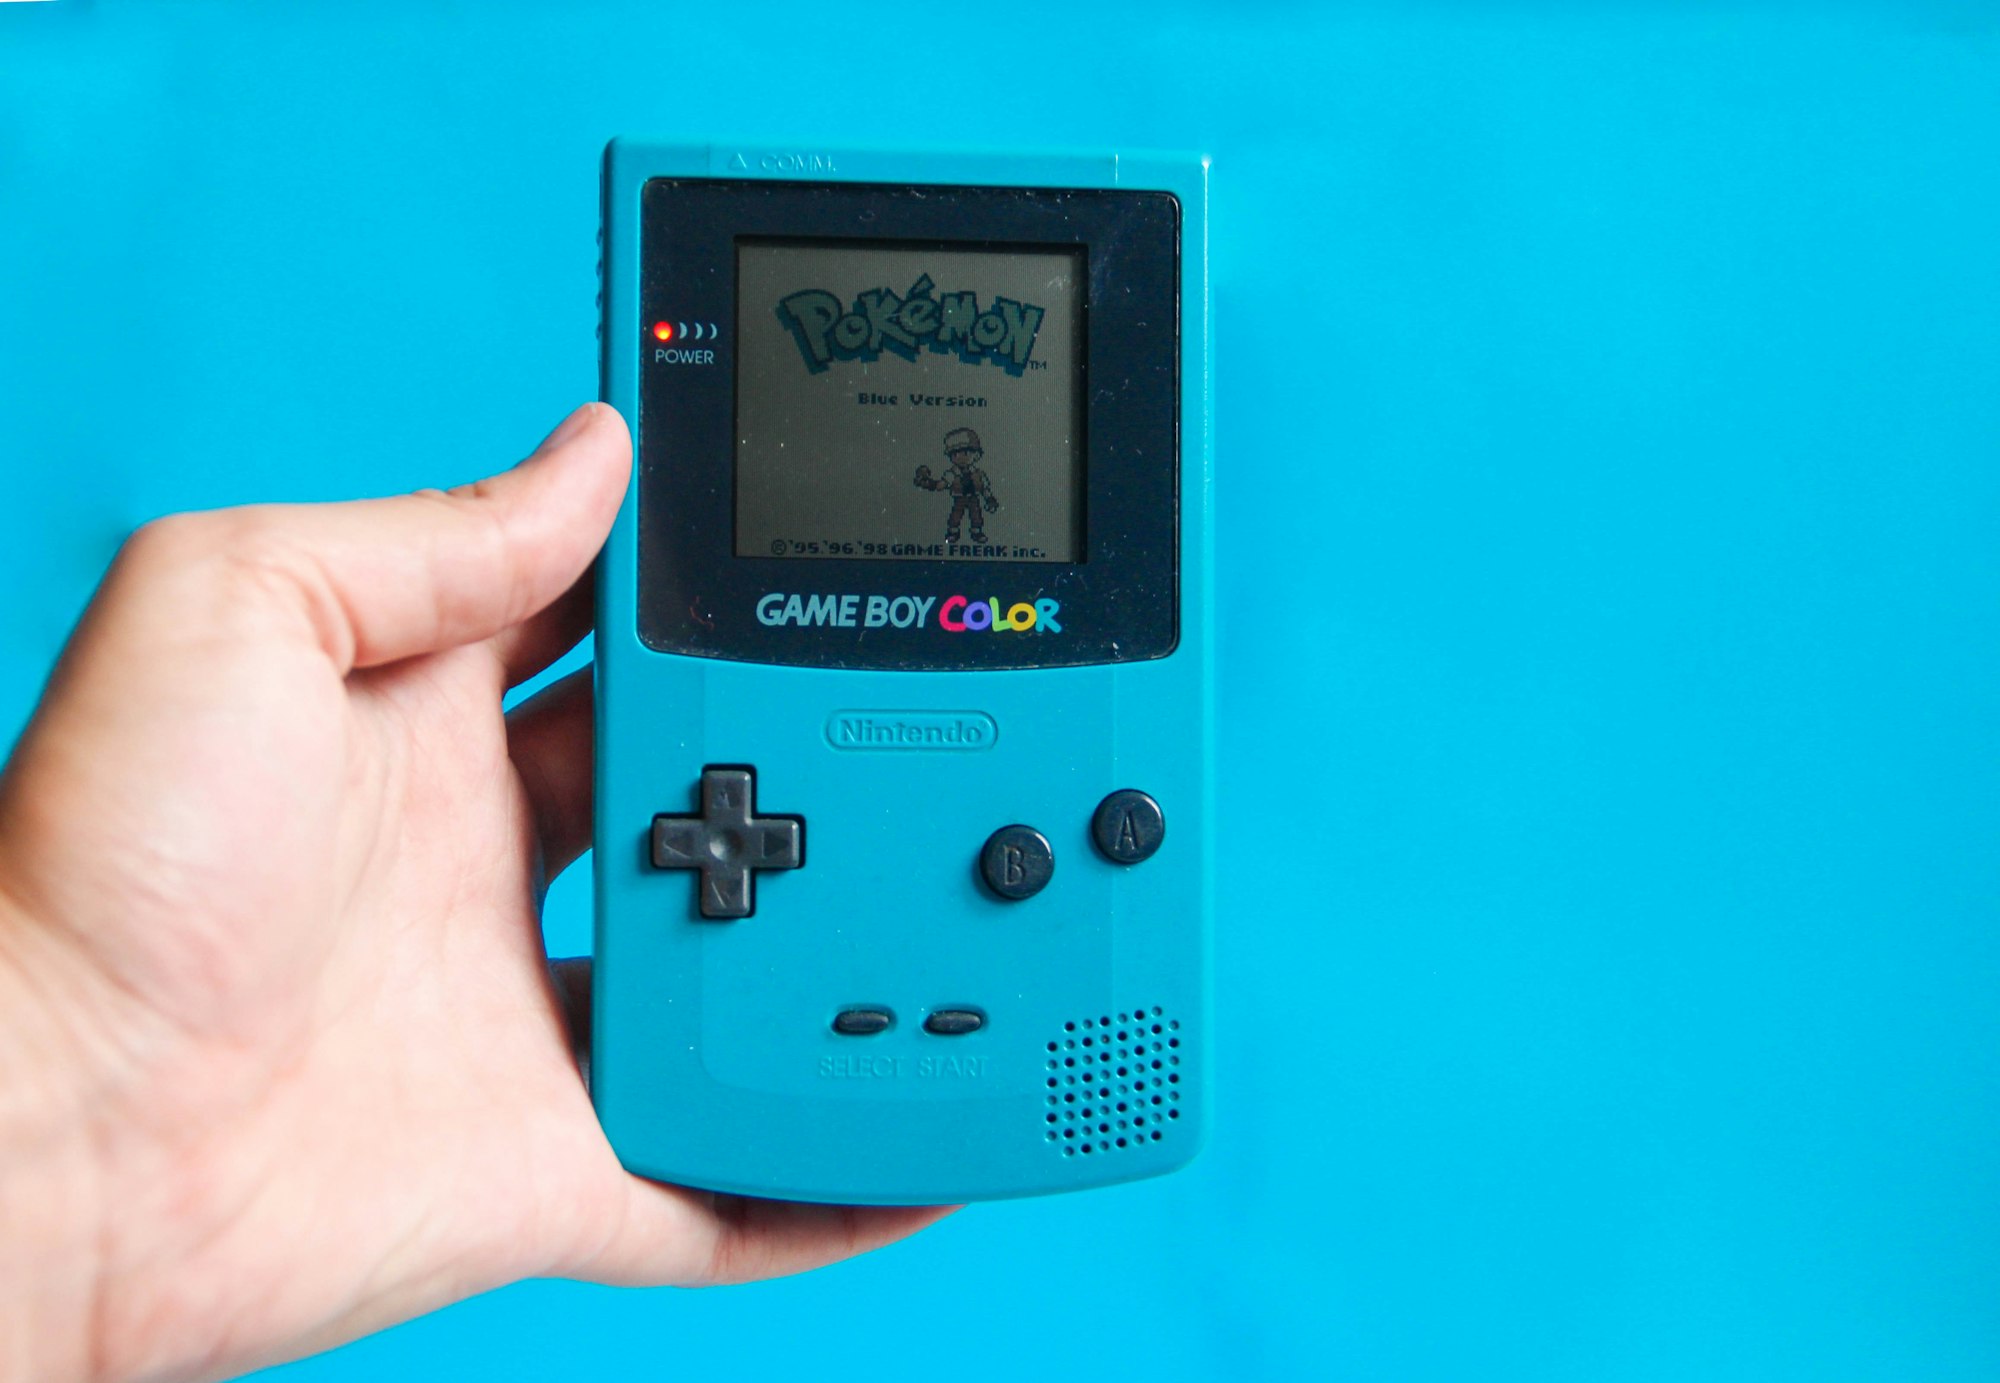 Pokémon use to be available on these small devices. 